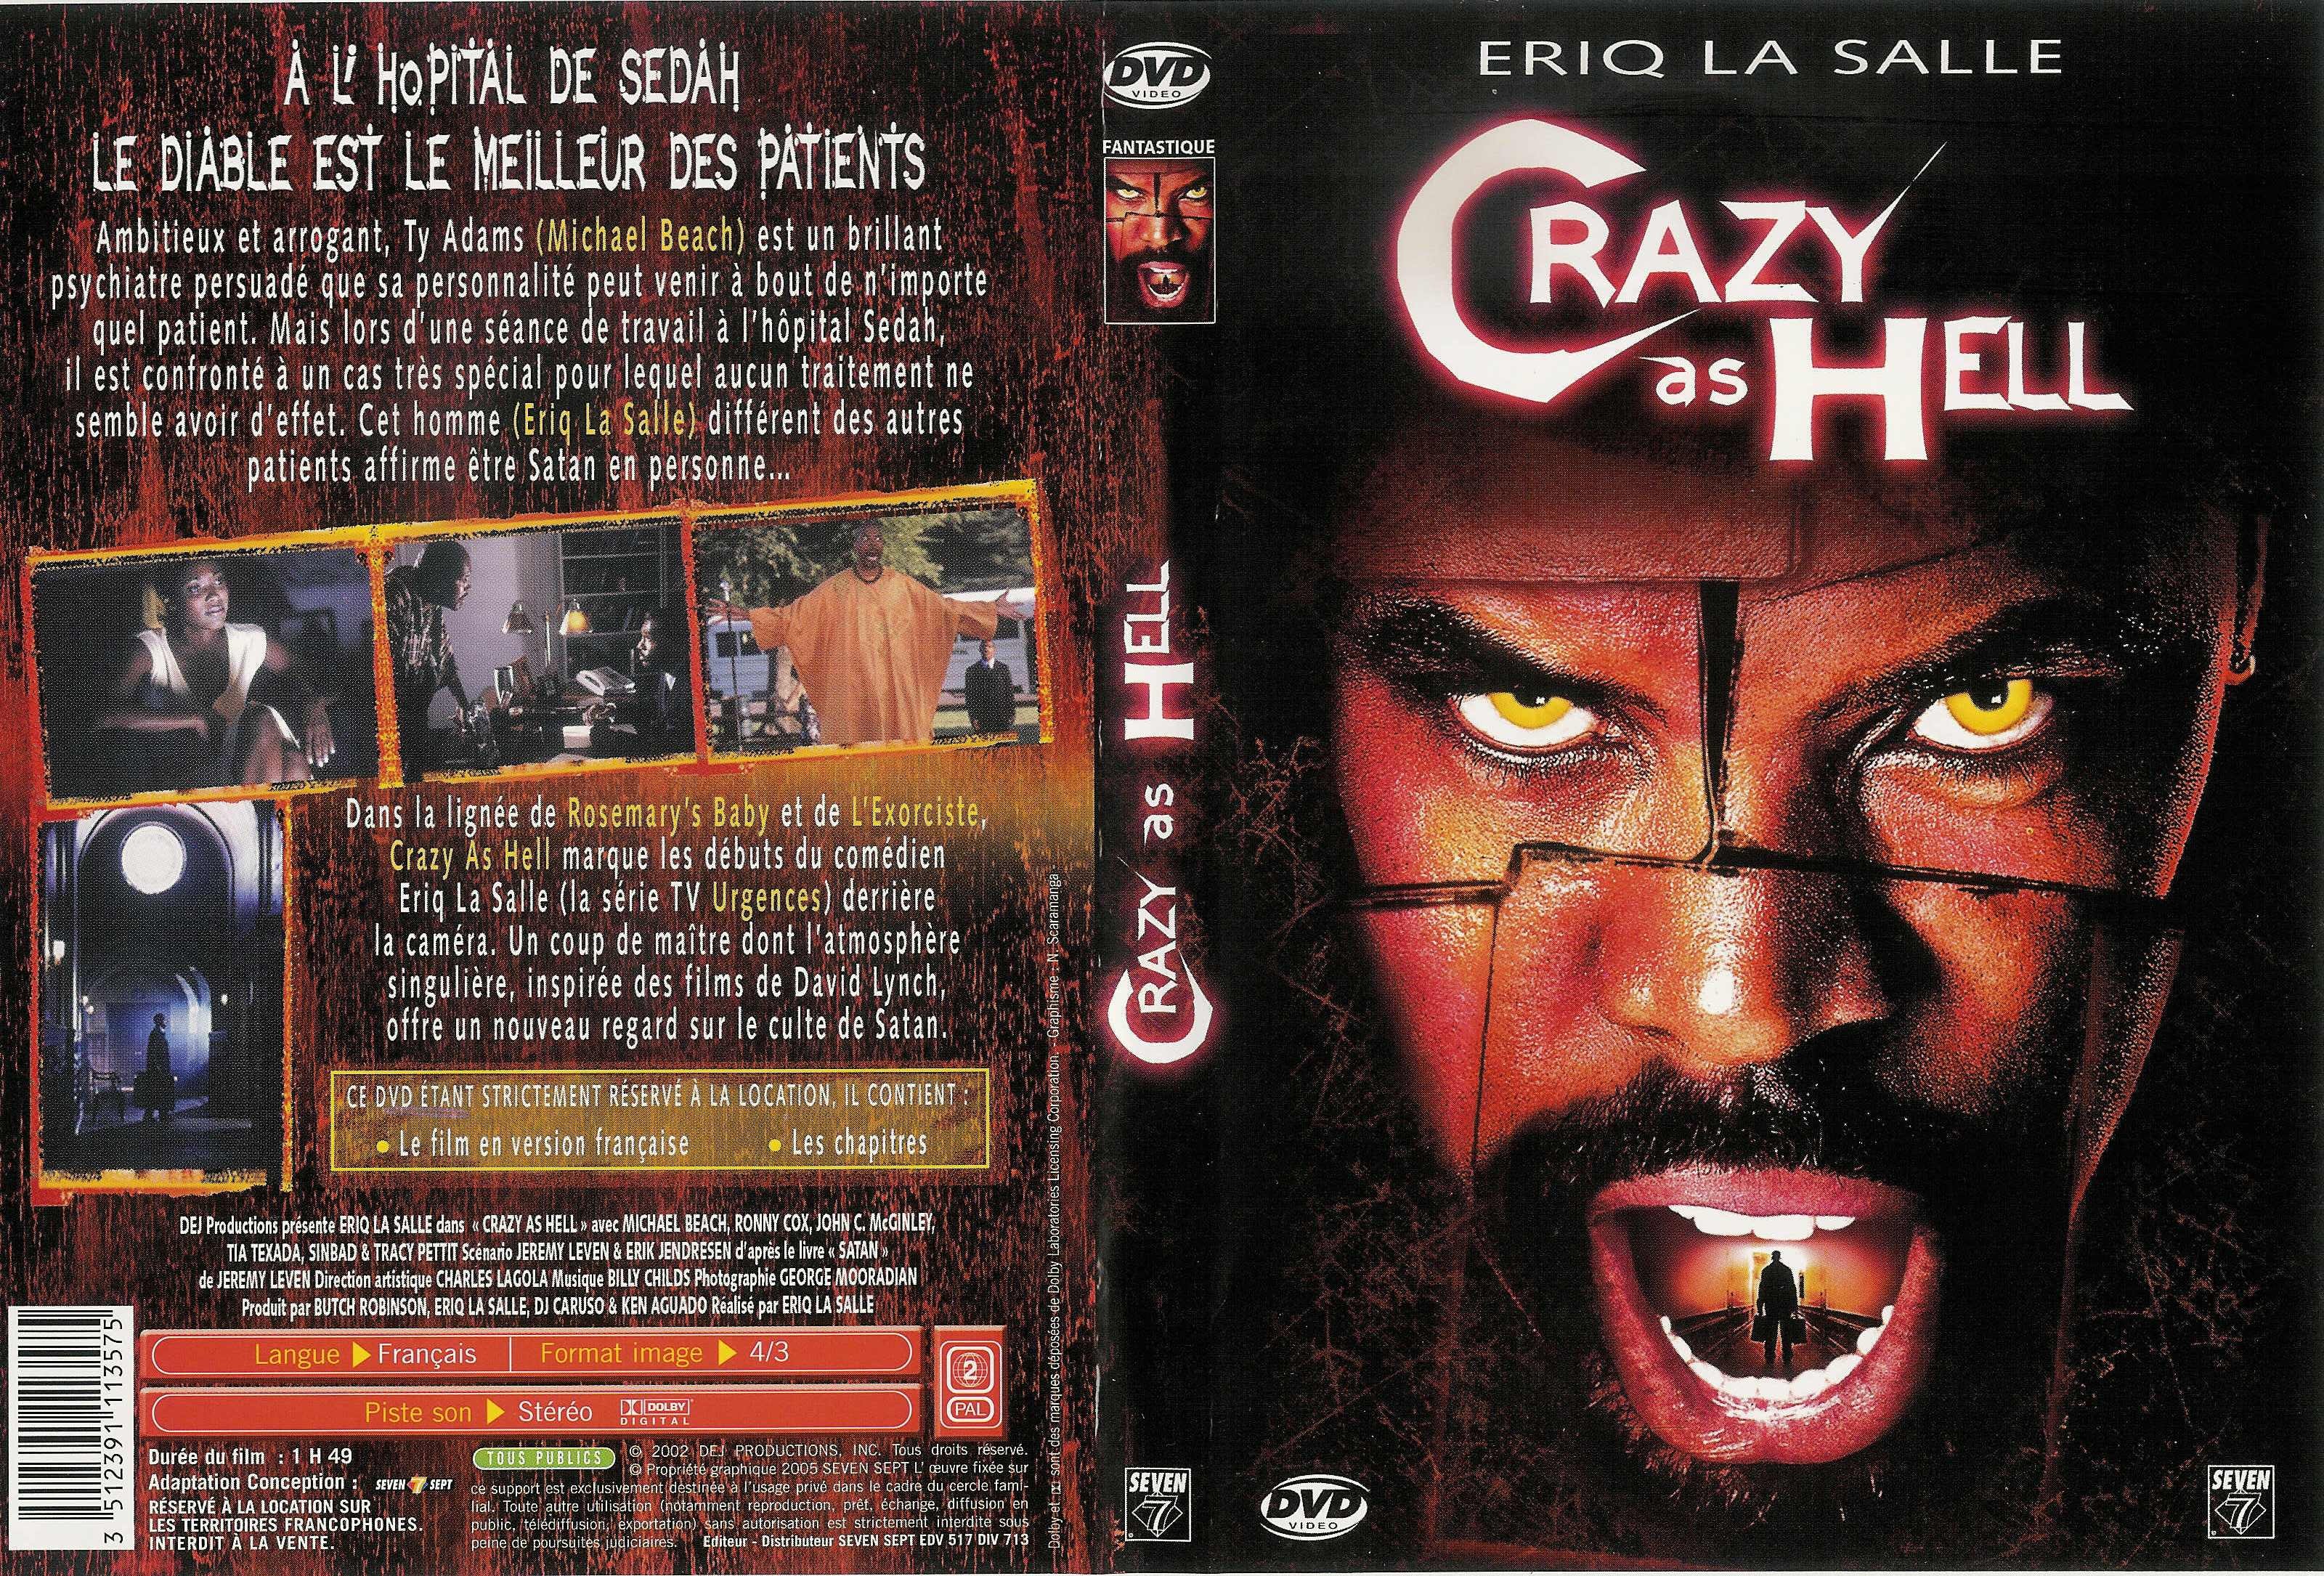 Jaquette DVD Crazy as hell v2